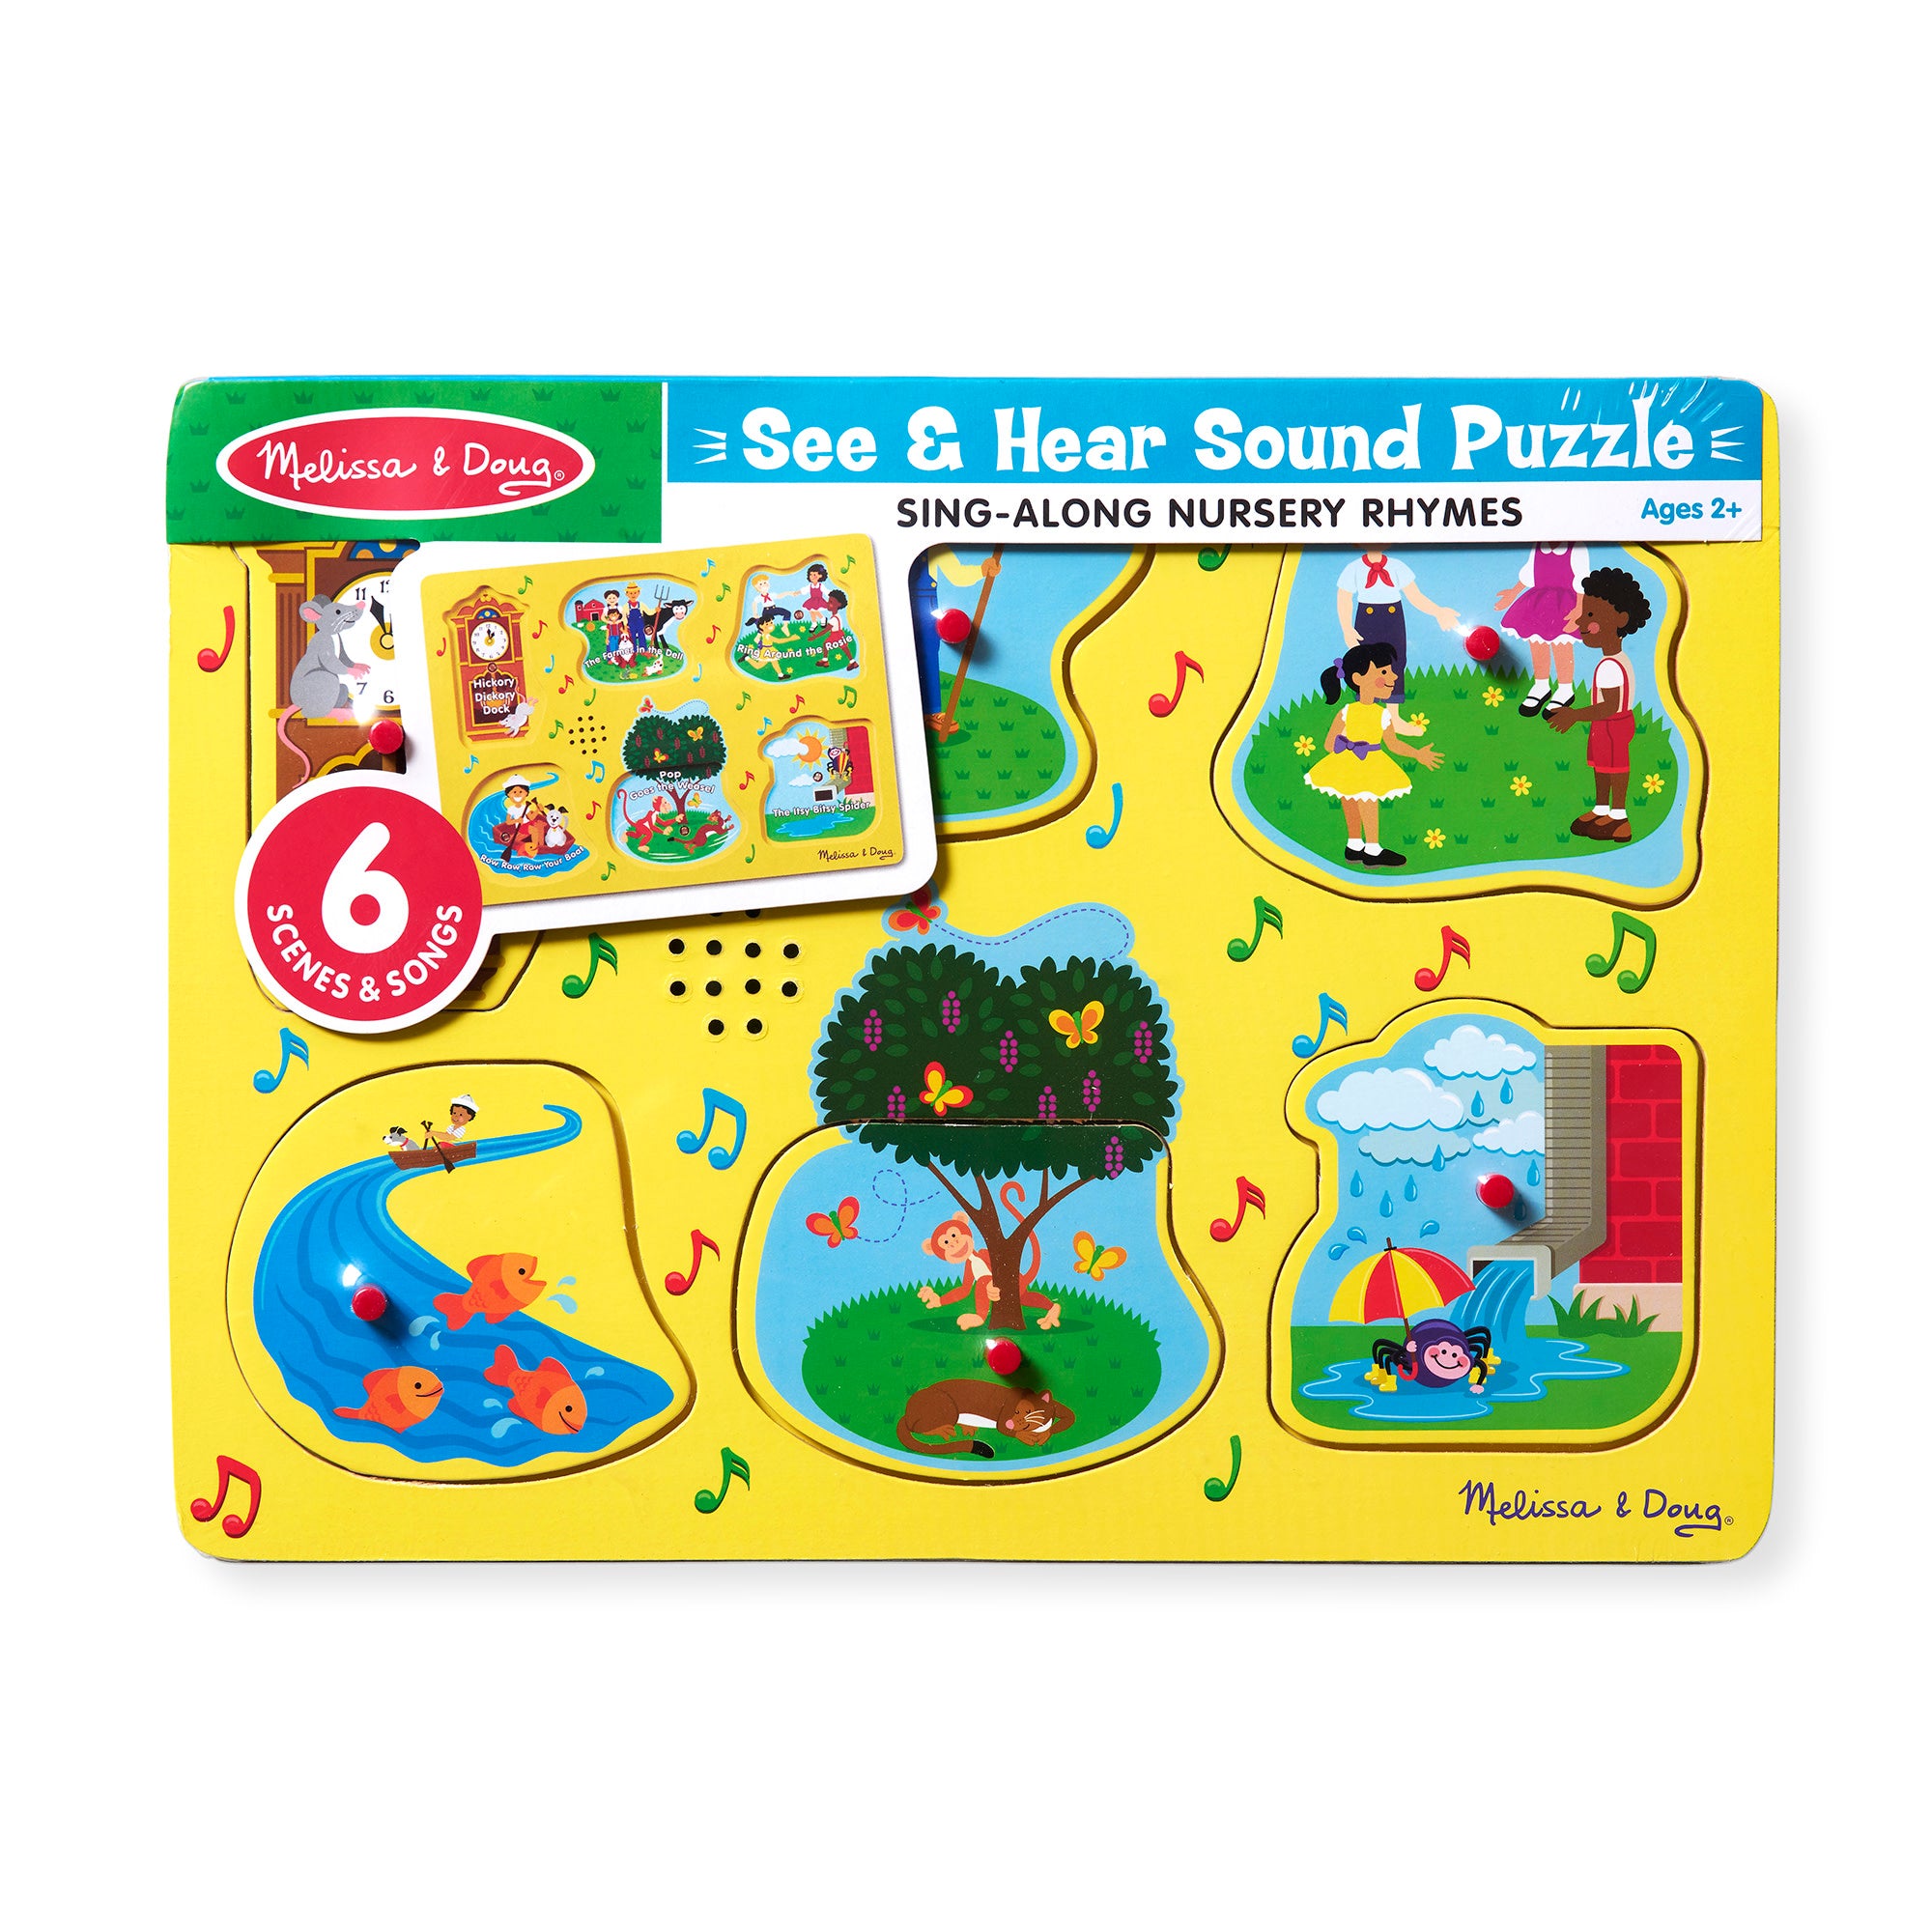 Nursery Rhymes Sound Puzzle | Wooden Peg Puzzle